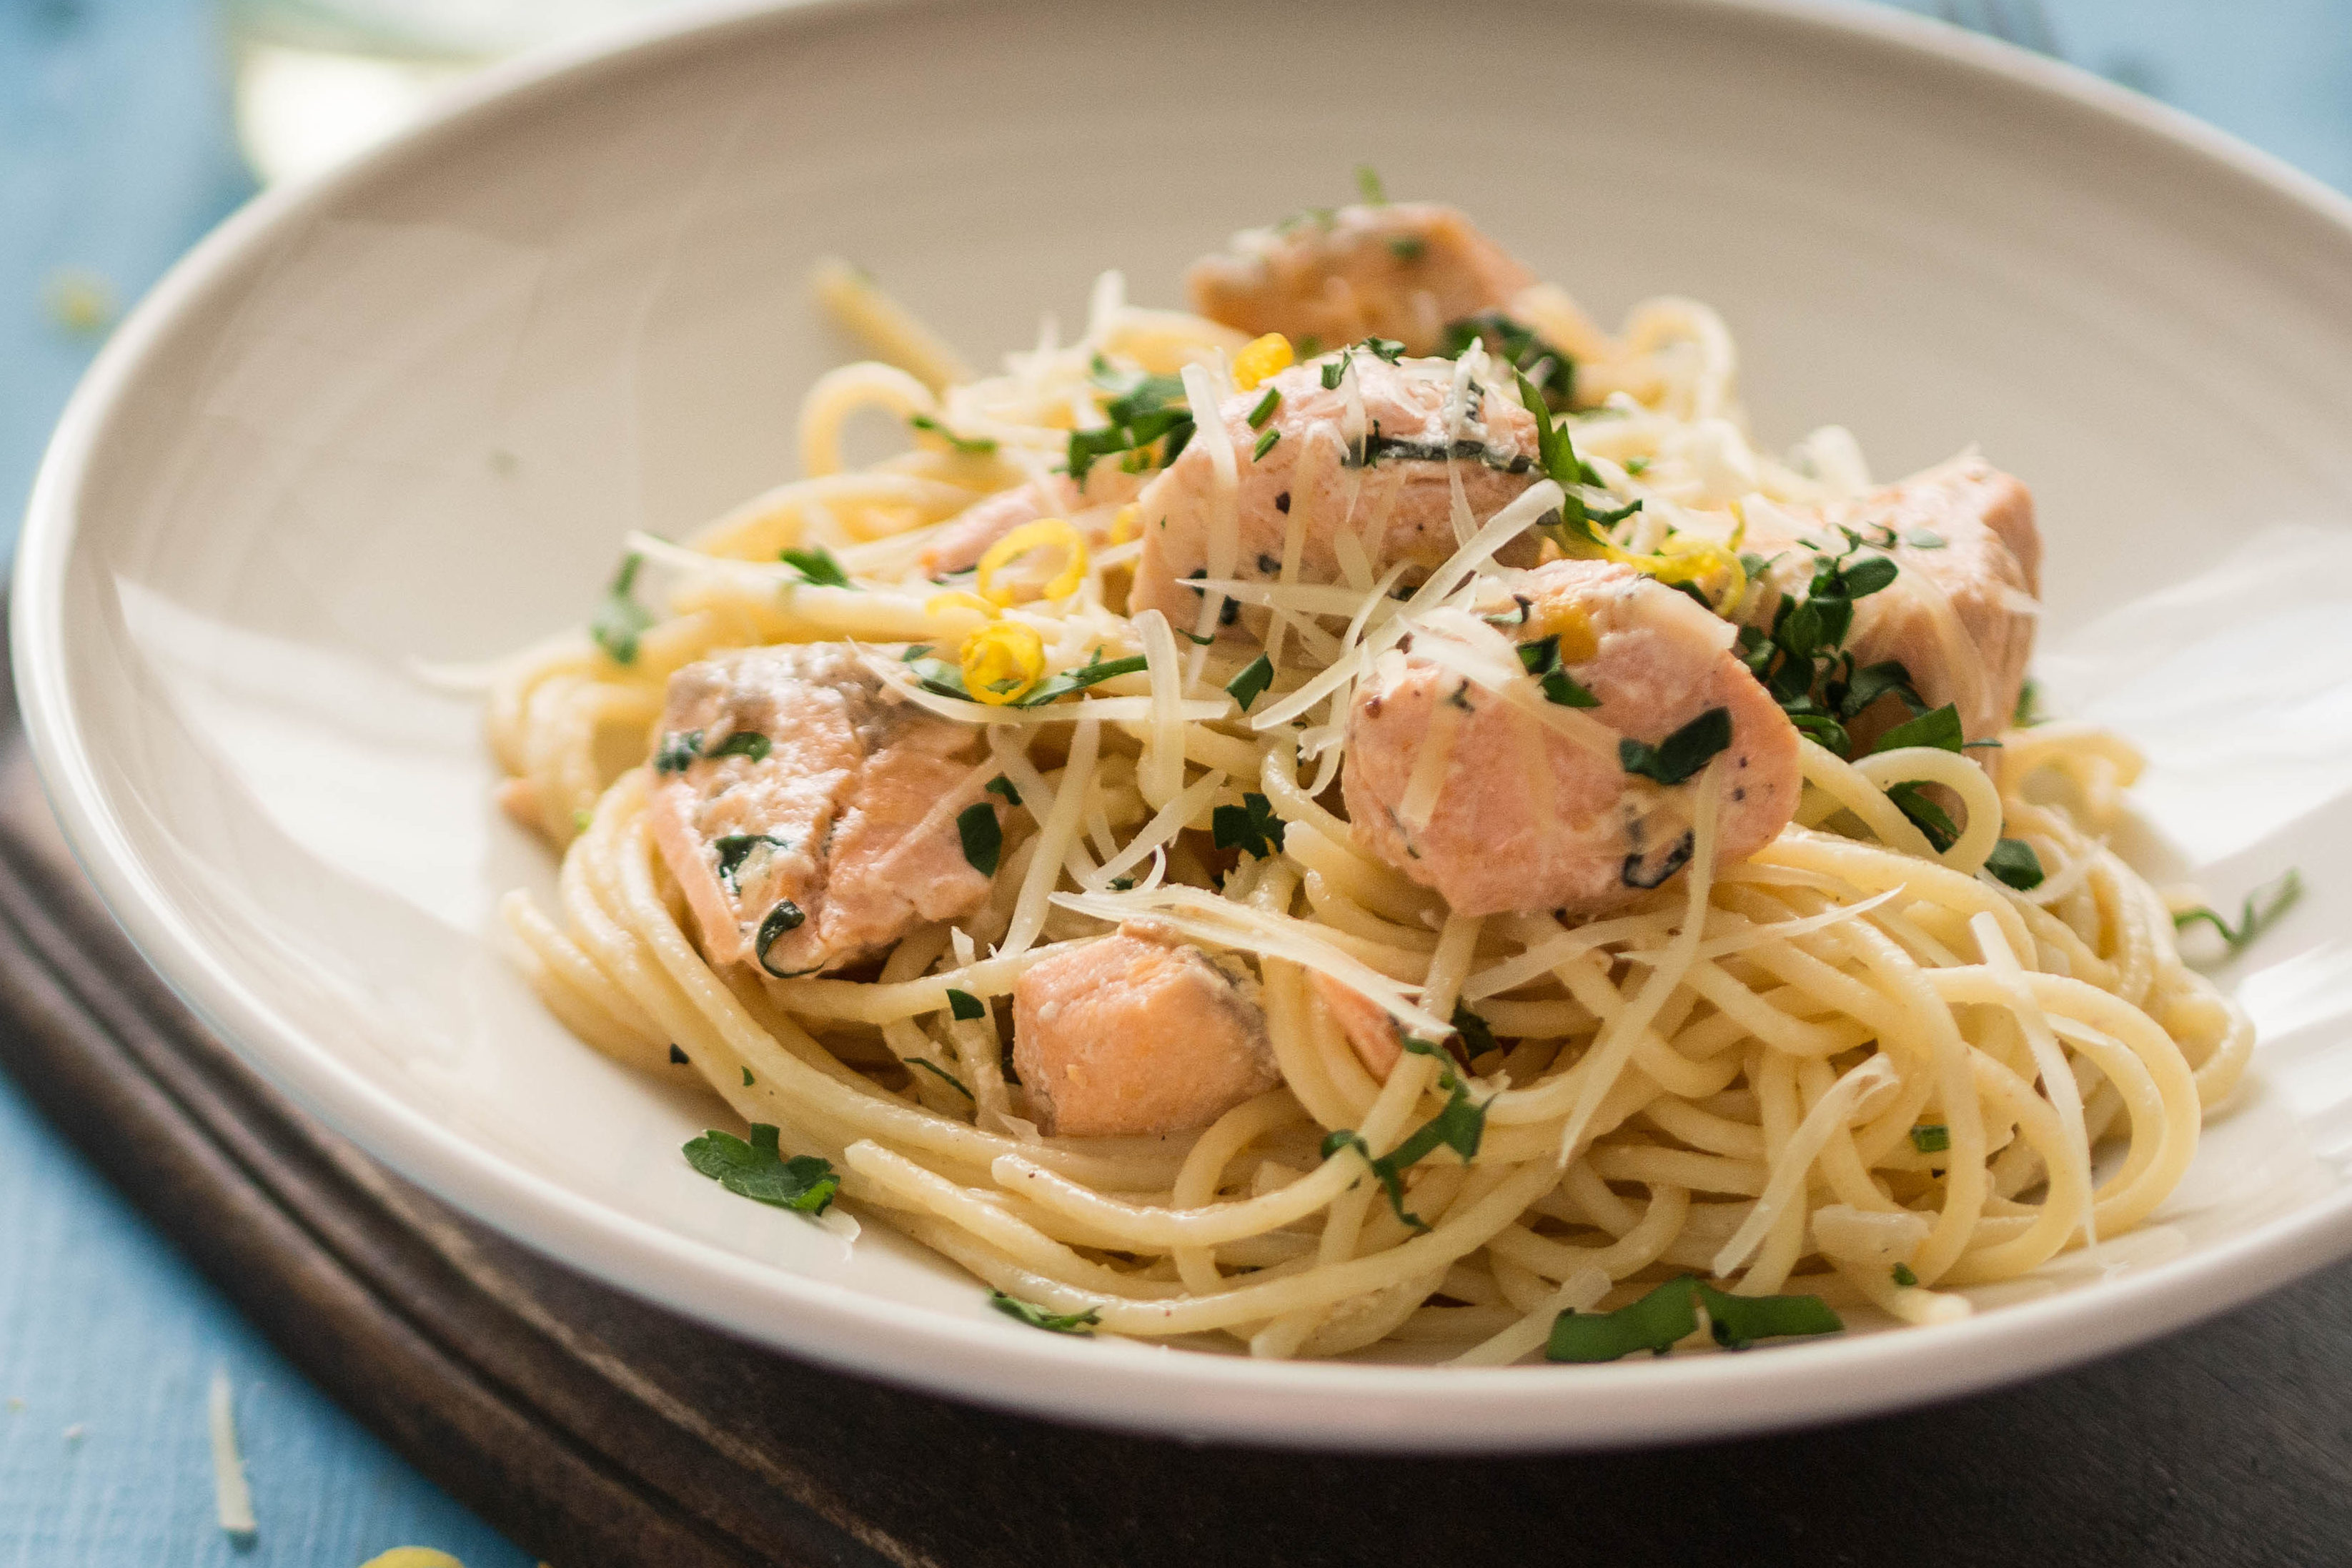 Meals for Under £10: Scotty Brand Smoked Salmon Carbonara - The Sunday Post